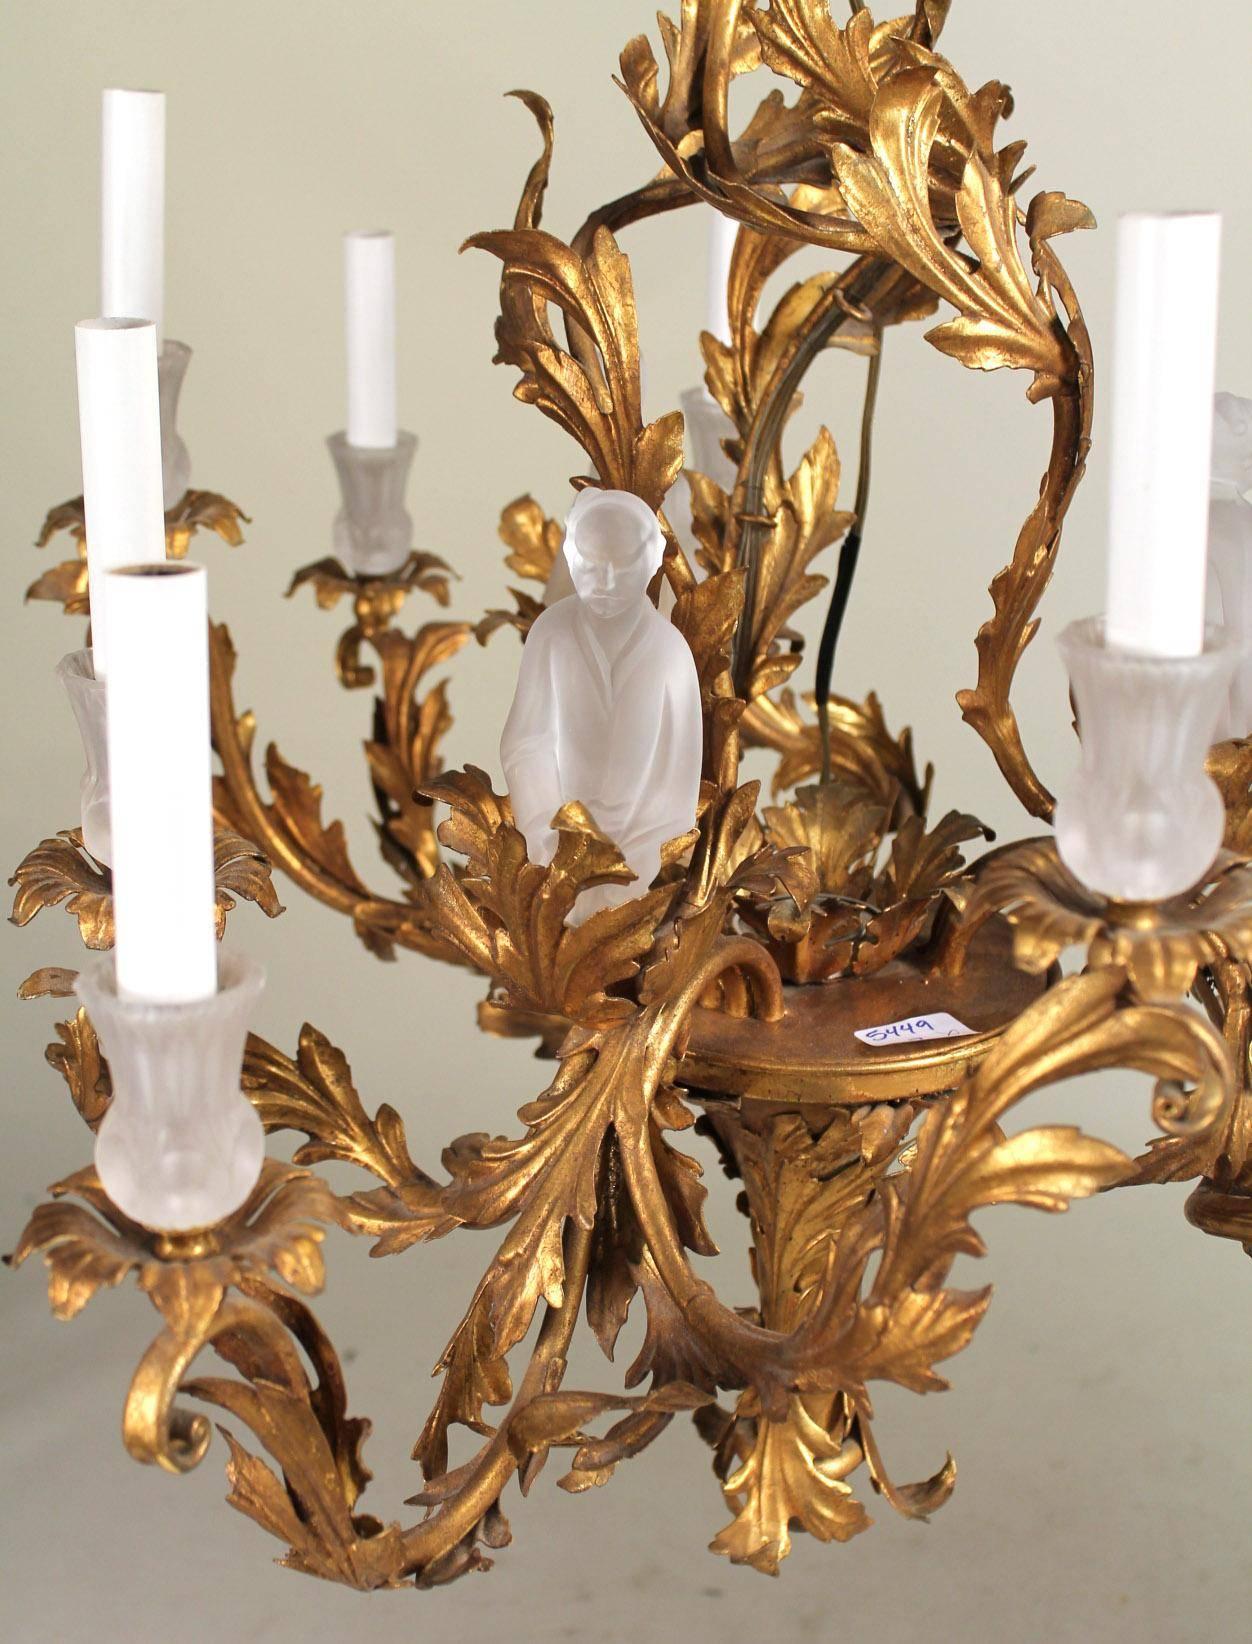 Unusual gilt chinoiserie chandelier in the Baroque taste from the 1980s, Italy.
Frosted glass figures of Asian wise men are set into the gilt Roccoco style leaf work settings. Additionally, frosted glass 